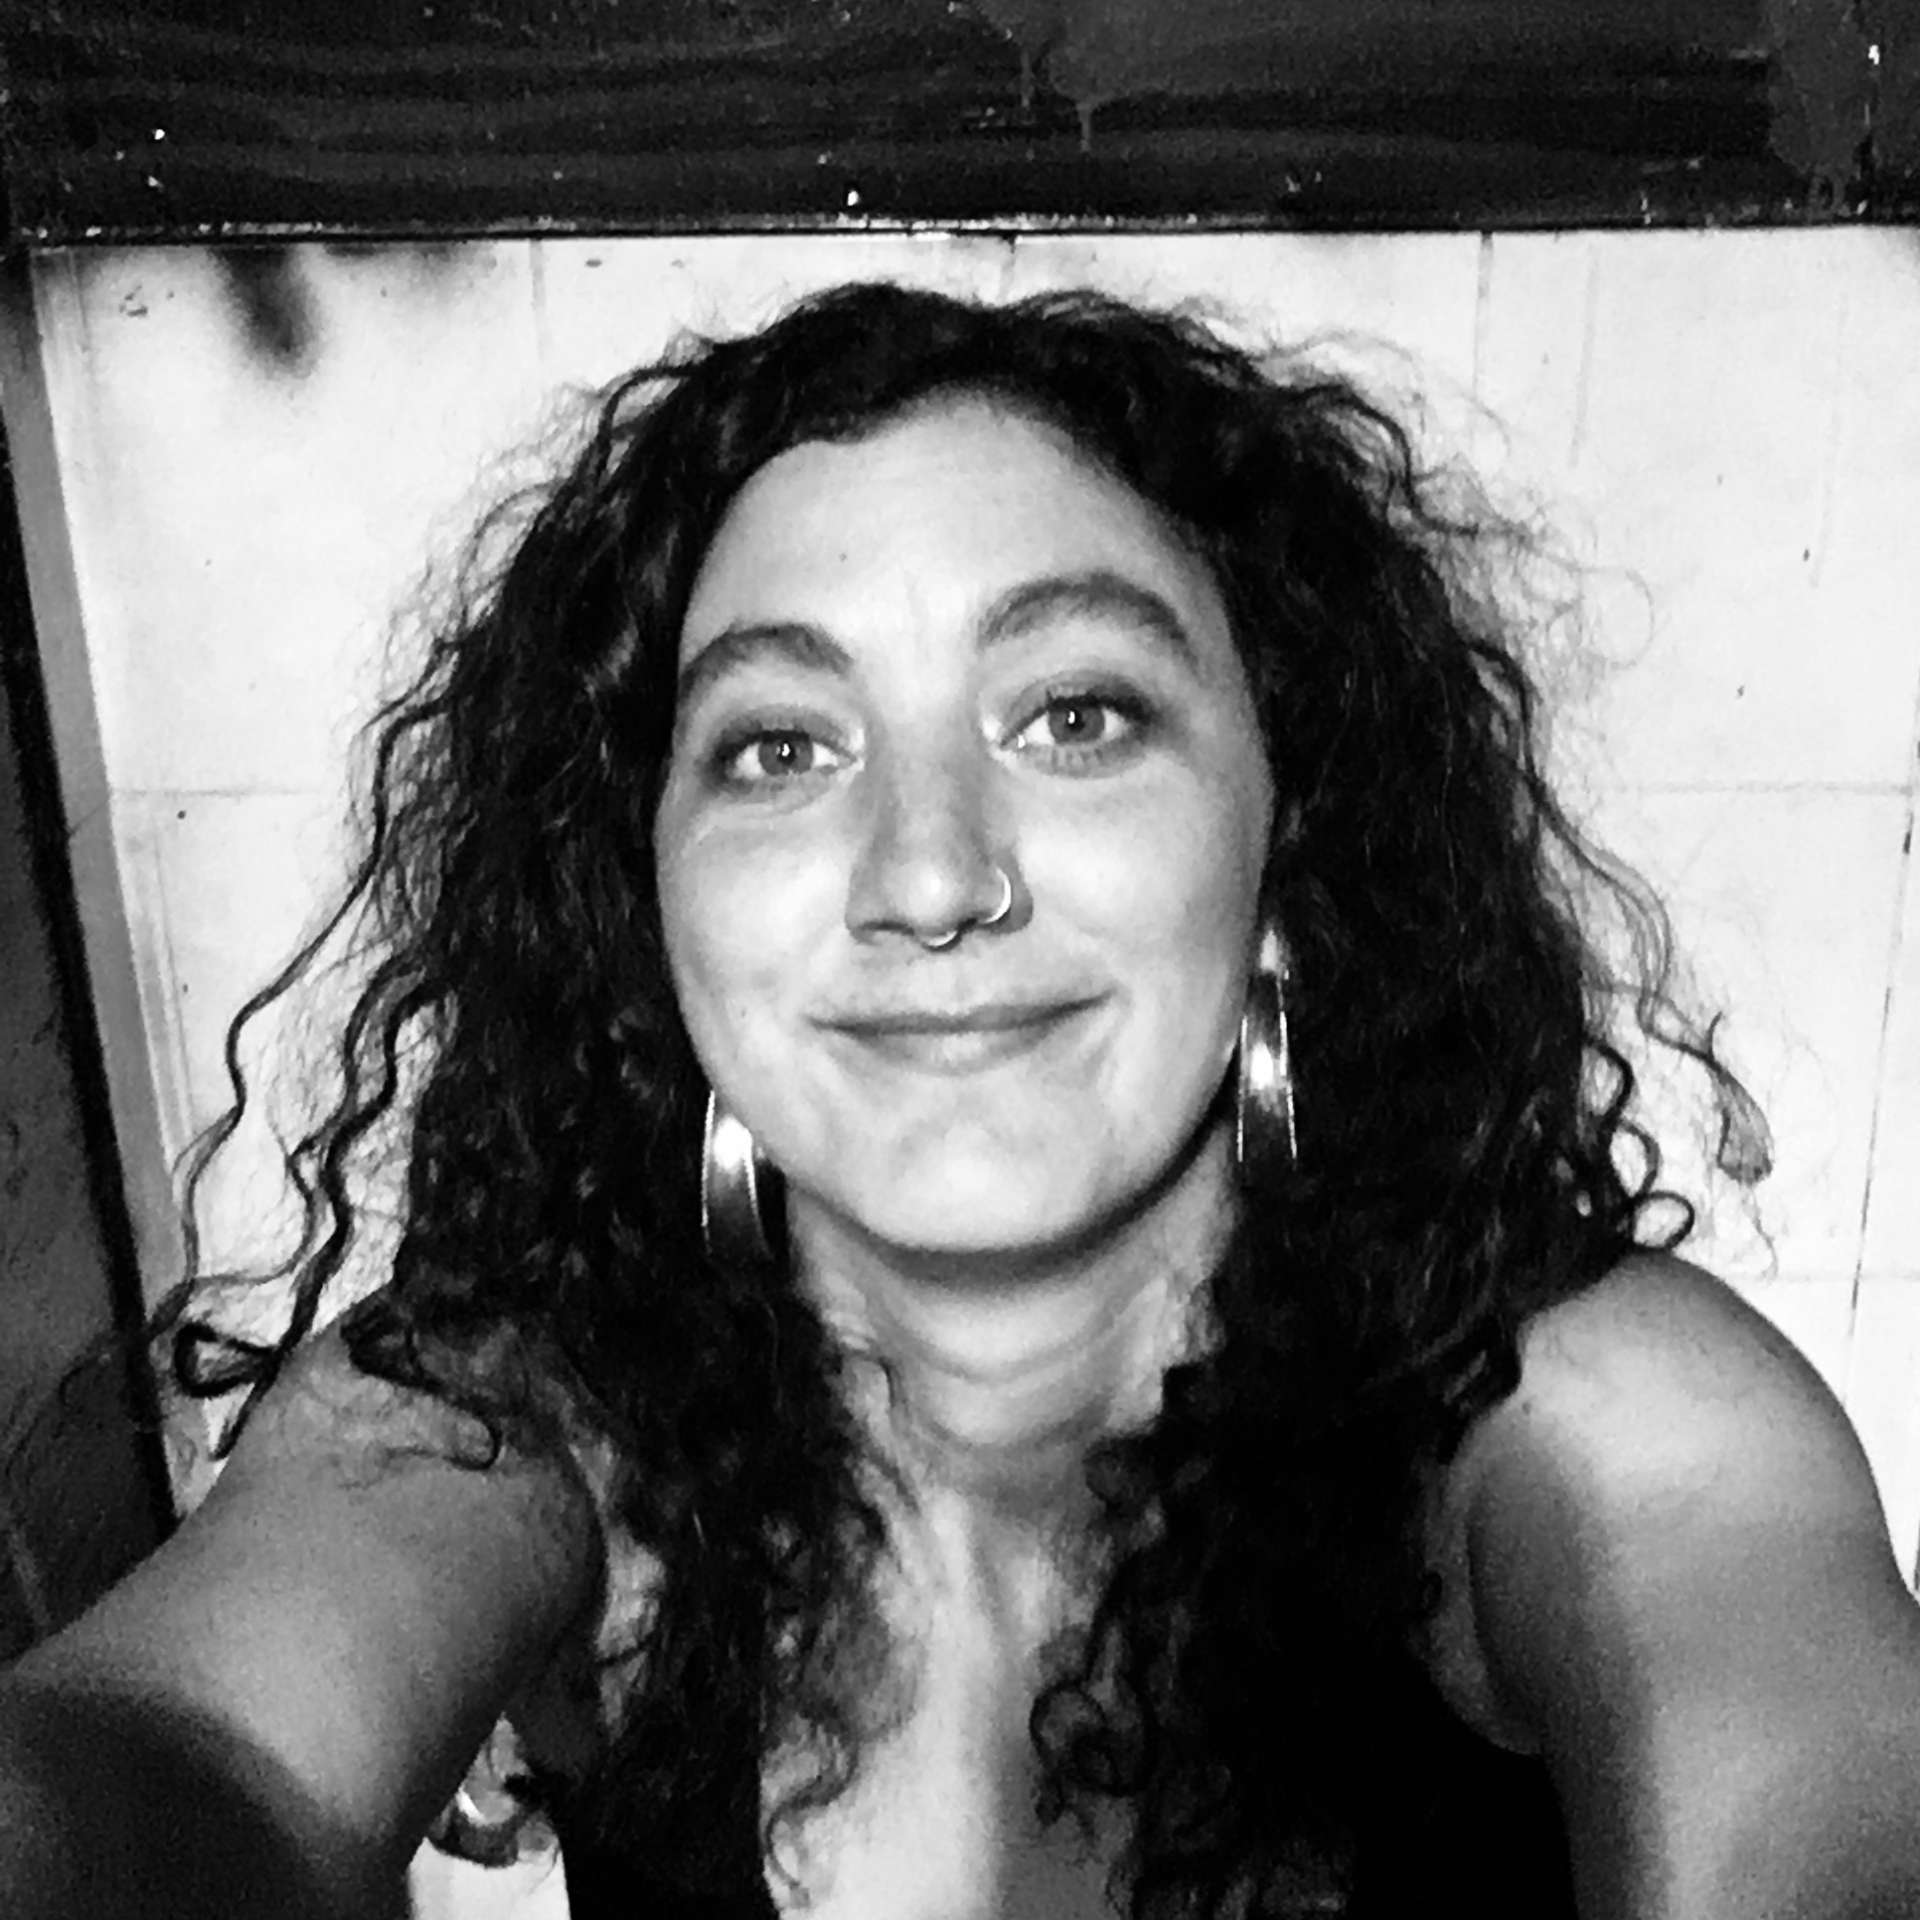 A black and white selfie of the writer, Mykaela Saunders. Mykaela is smiling at the camera and has long curly hair that falls over her shoulders.